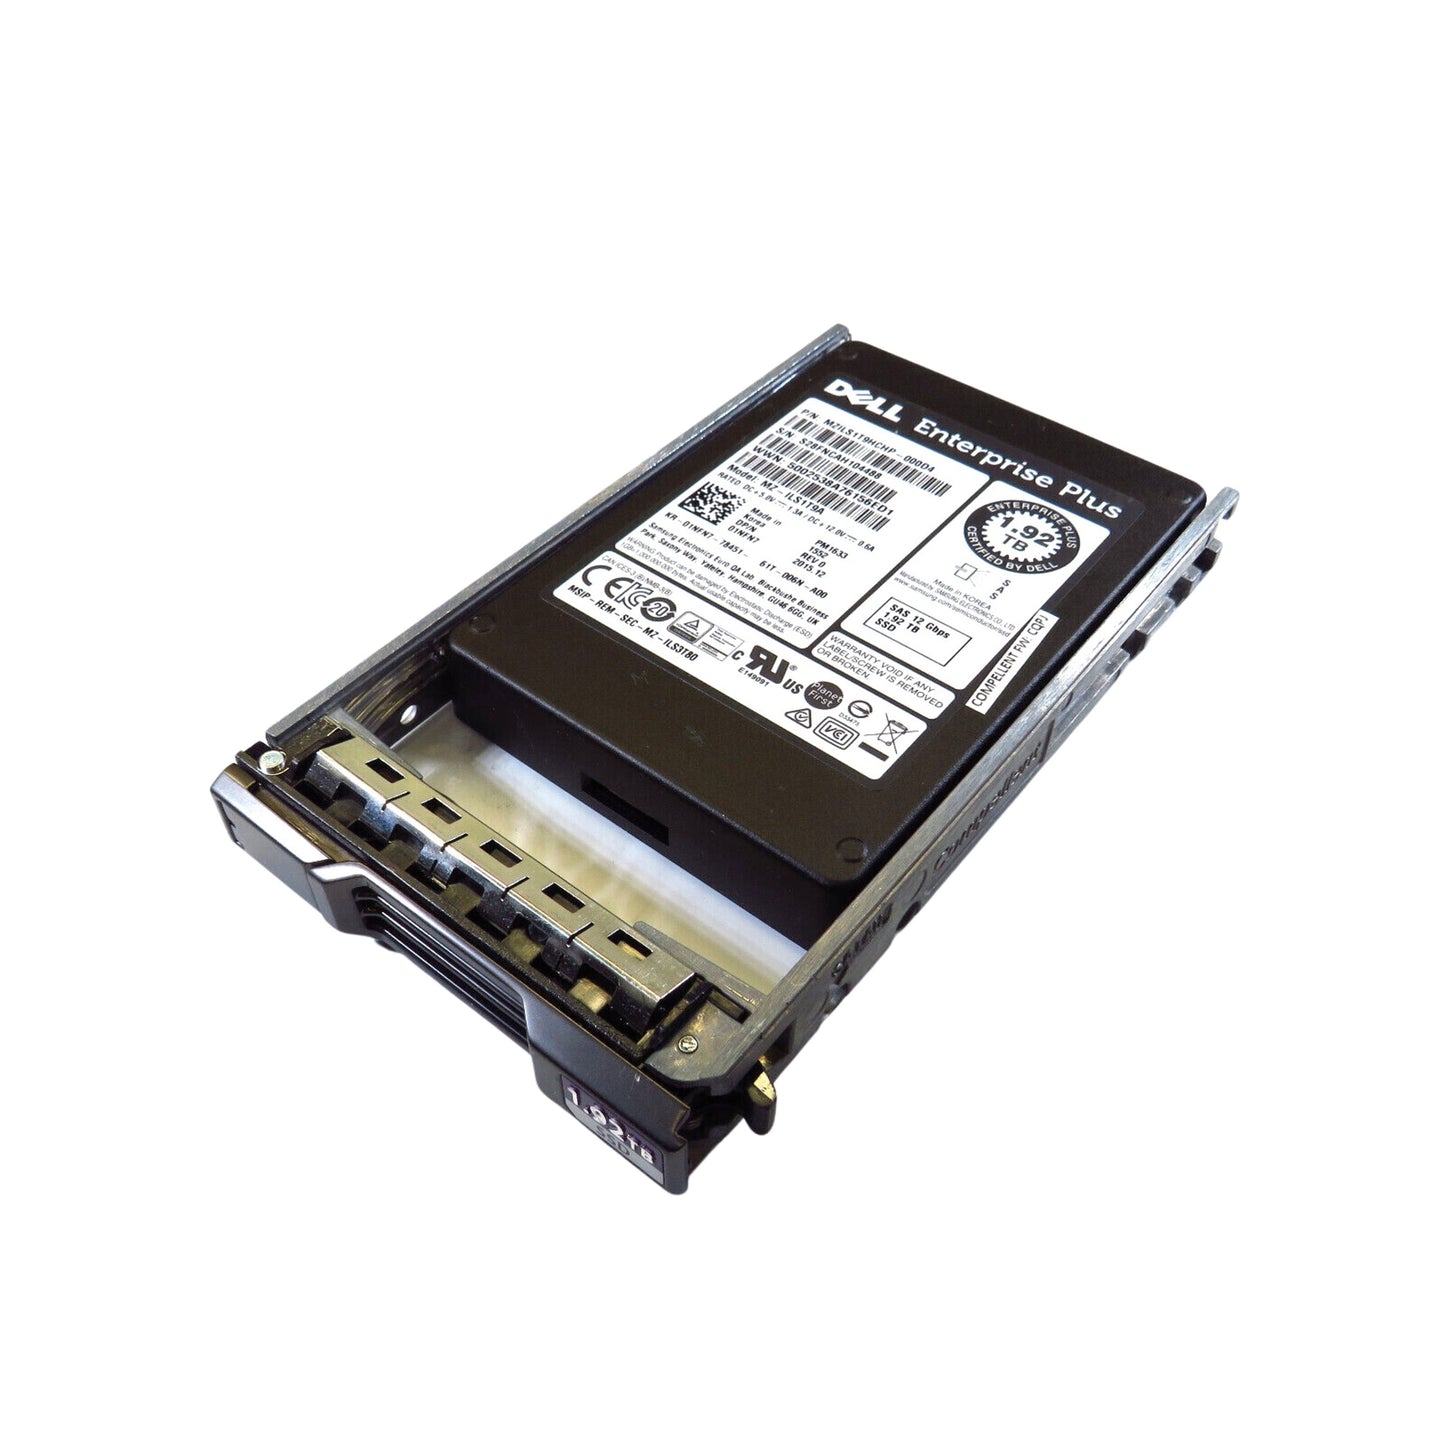 Dell Compellent 1NFN7 1.92TB 2.5" SAS 12Gbps SSD Solid State Drive (Refurbished)